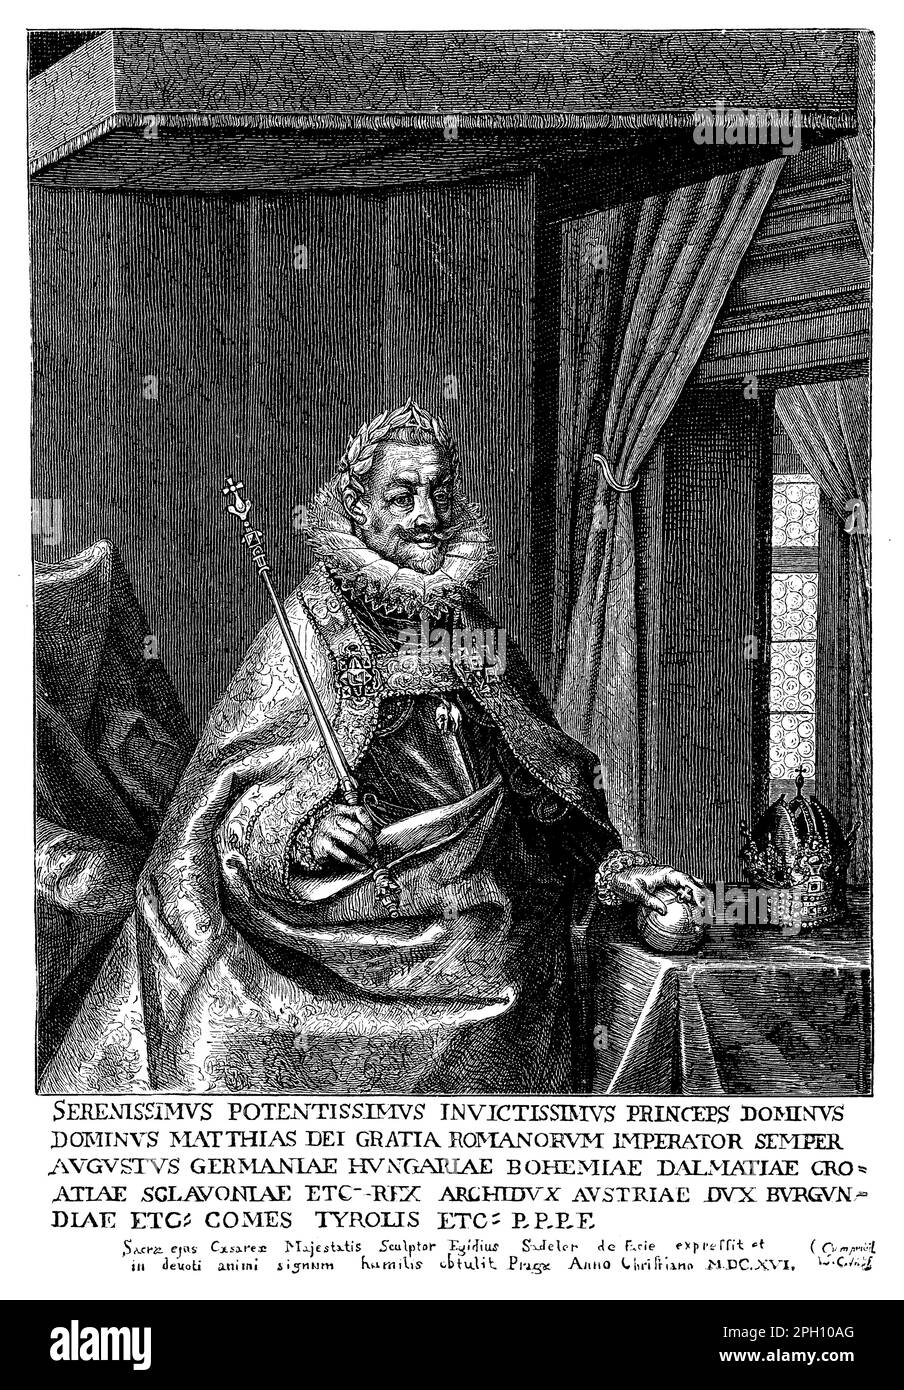 Matthias (1557-1619) was Holy Roman Emperor from 1612 until his death. He was a member of the House of Habsburg and was known for his efforts to reform the Imperial administration and stabilize the Empire after the religious conflicts of the previous century. Matthias also oversaw the beginning of the Bohemian Revolt and the Thirty Years' War, which lasted for much of his reign. He was a patron of the arts and sciences and is remembered for his support of music and theater Stock Photo